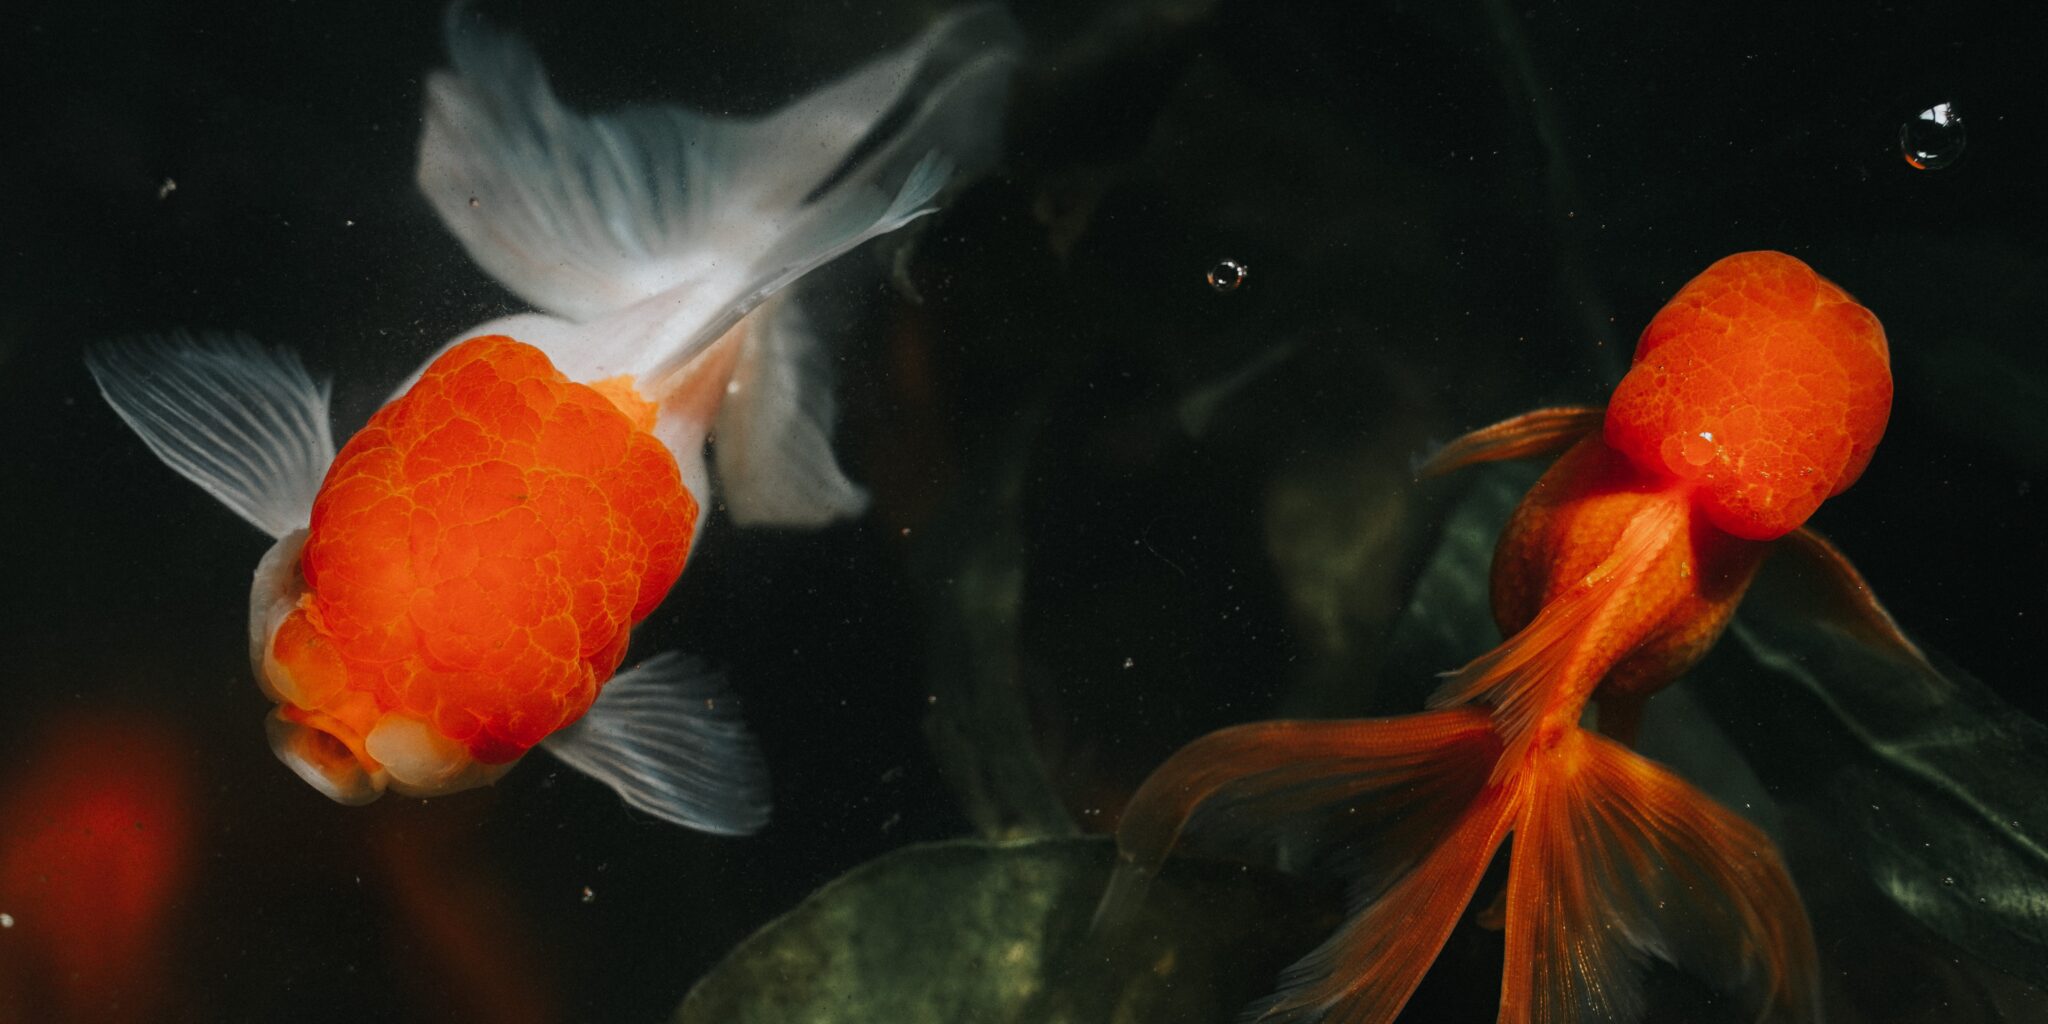 Image of two goldfish swimming in water, one slightly ahead of the other. The goldfish represent the concept of personalization in modern times, as our attention span is now shorter than that of a goldfish. The metaphor highlights the need to tailor content and experiences to capture and hold the attention of the audience.